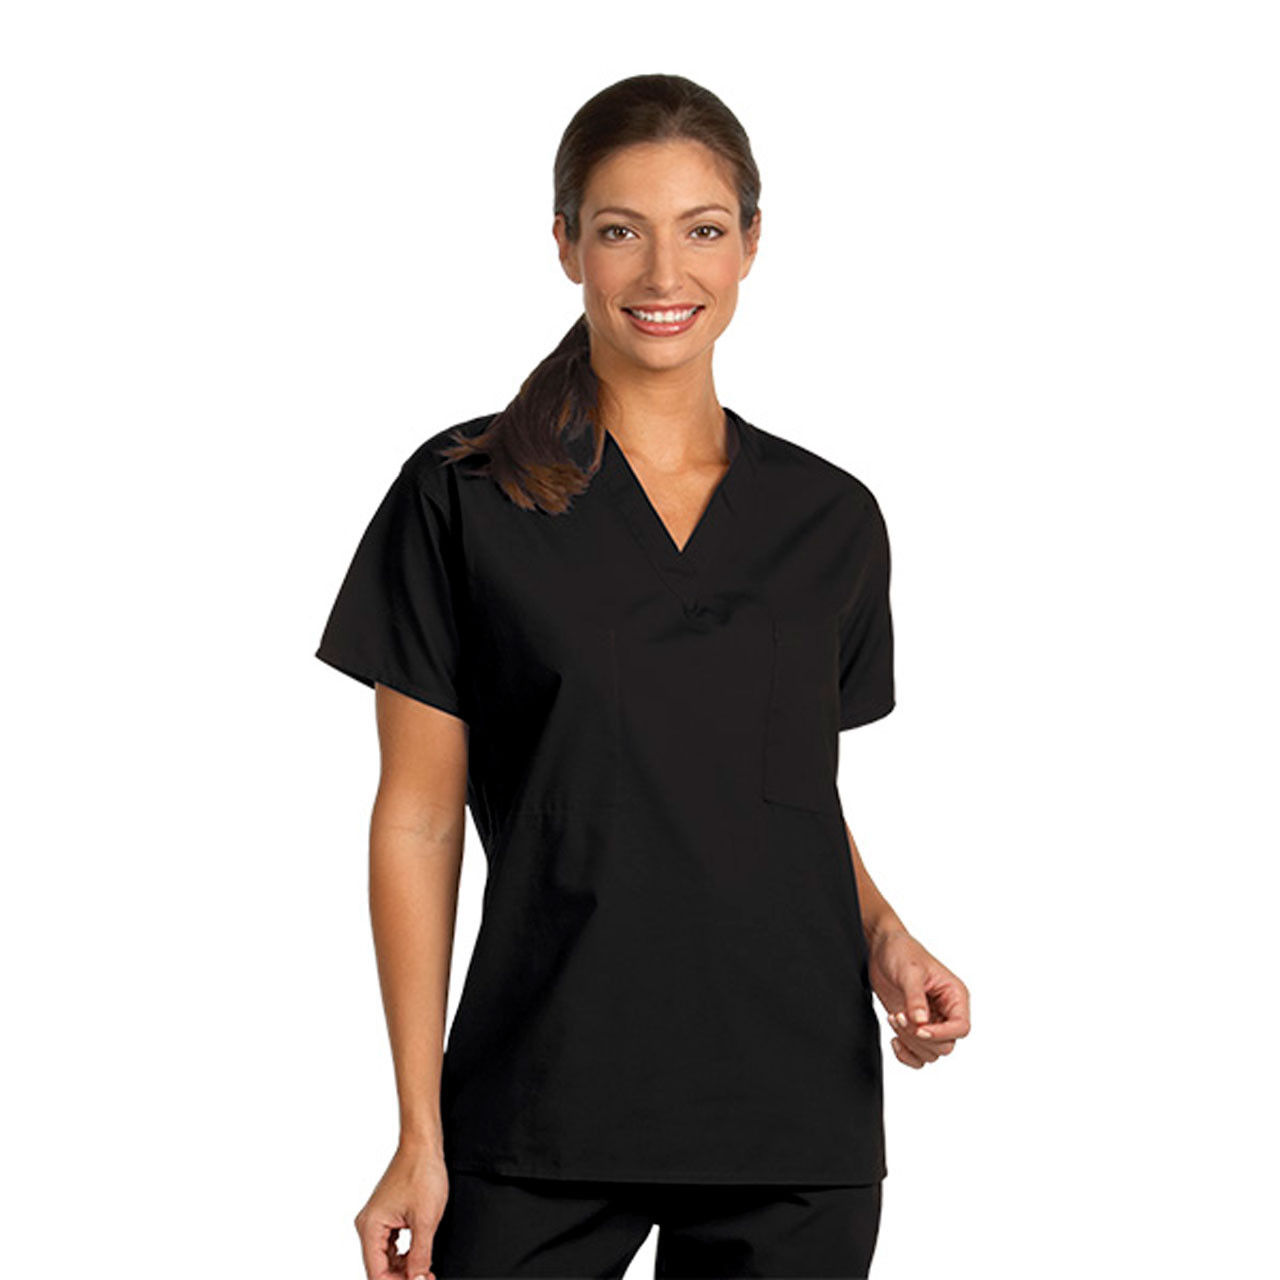 Unisex Reversible Scrub, with Pocket, Black - In Bulk Case of 12 or 72 Questions & Answers